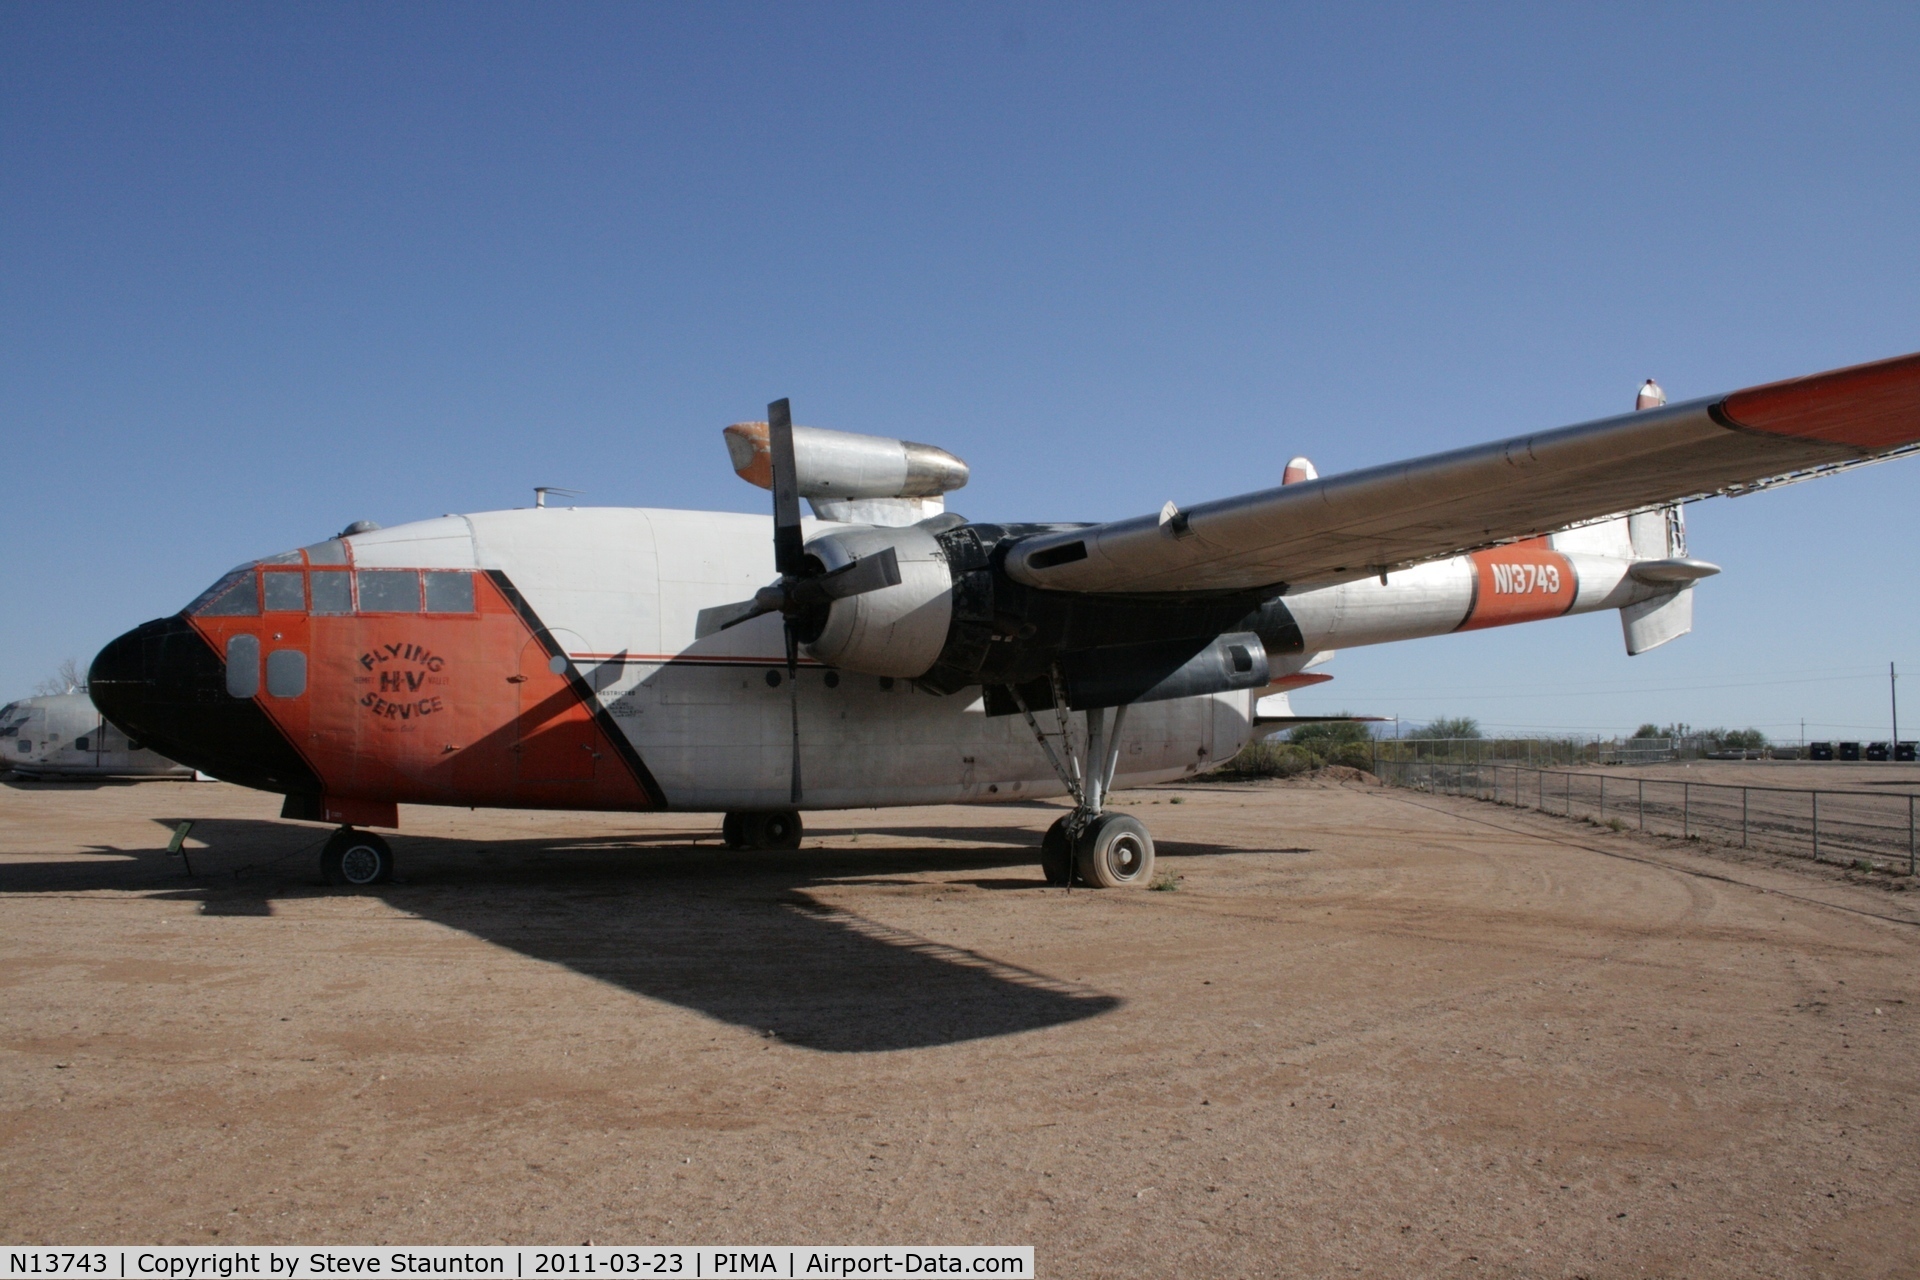 N13743, 1949 Fairchild C-119C Flying Boxcar C/N 10369, Taken at Pima Air and Space Museum, in March 2011 whilst on an Aeroprint Aviation tour